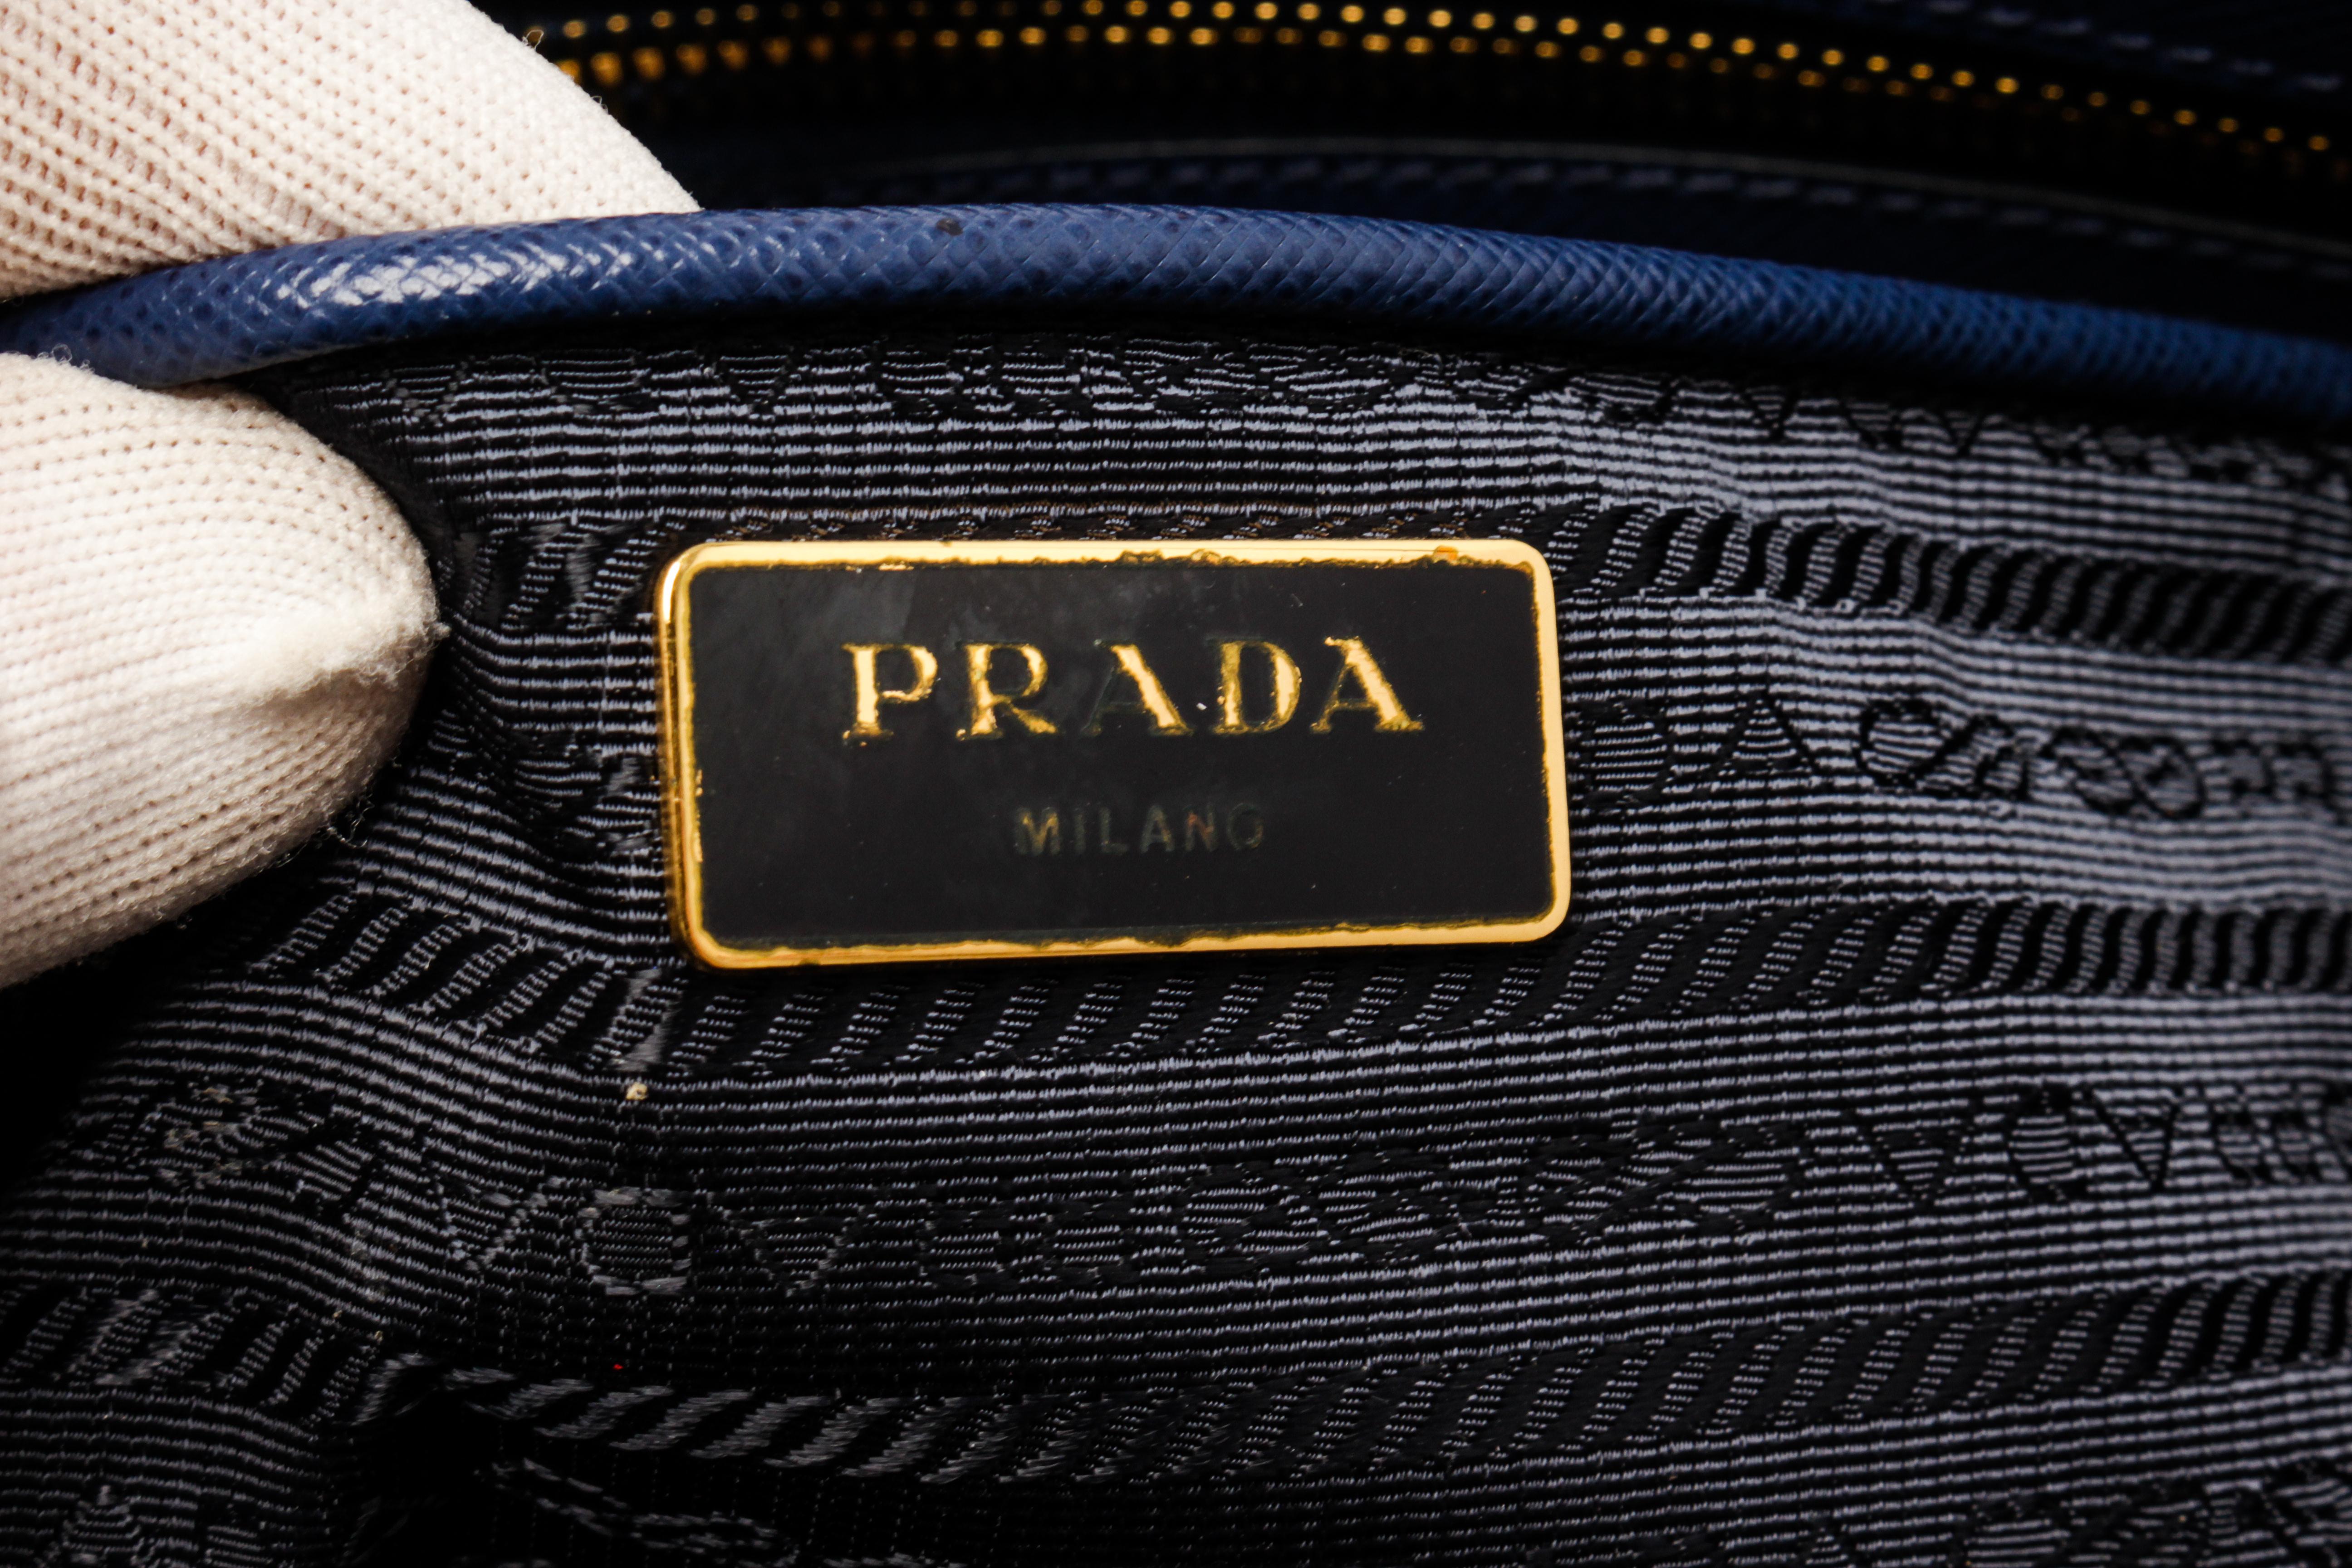 Prada Navy Blue Saffiano Leather Large Galleria Double Zip Tote Bag 5